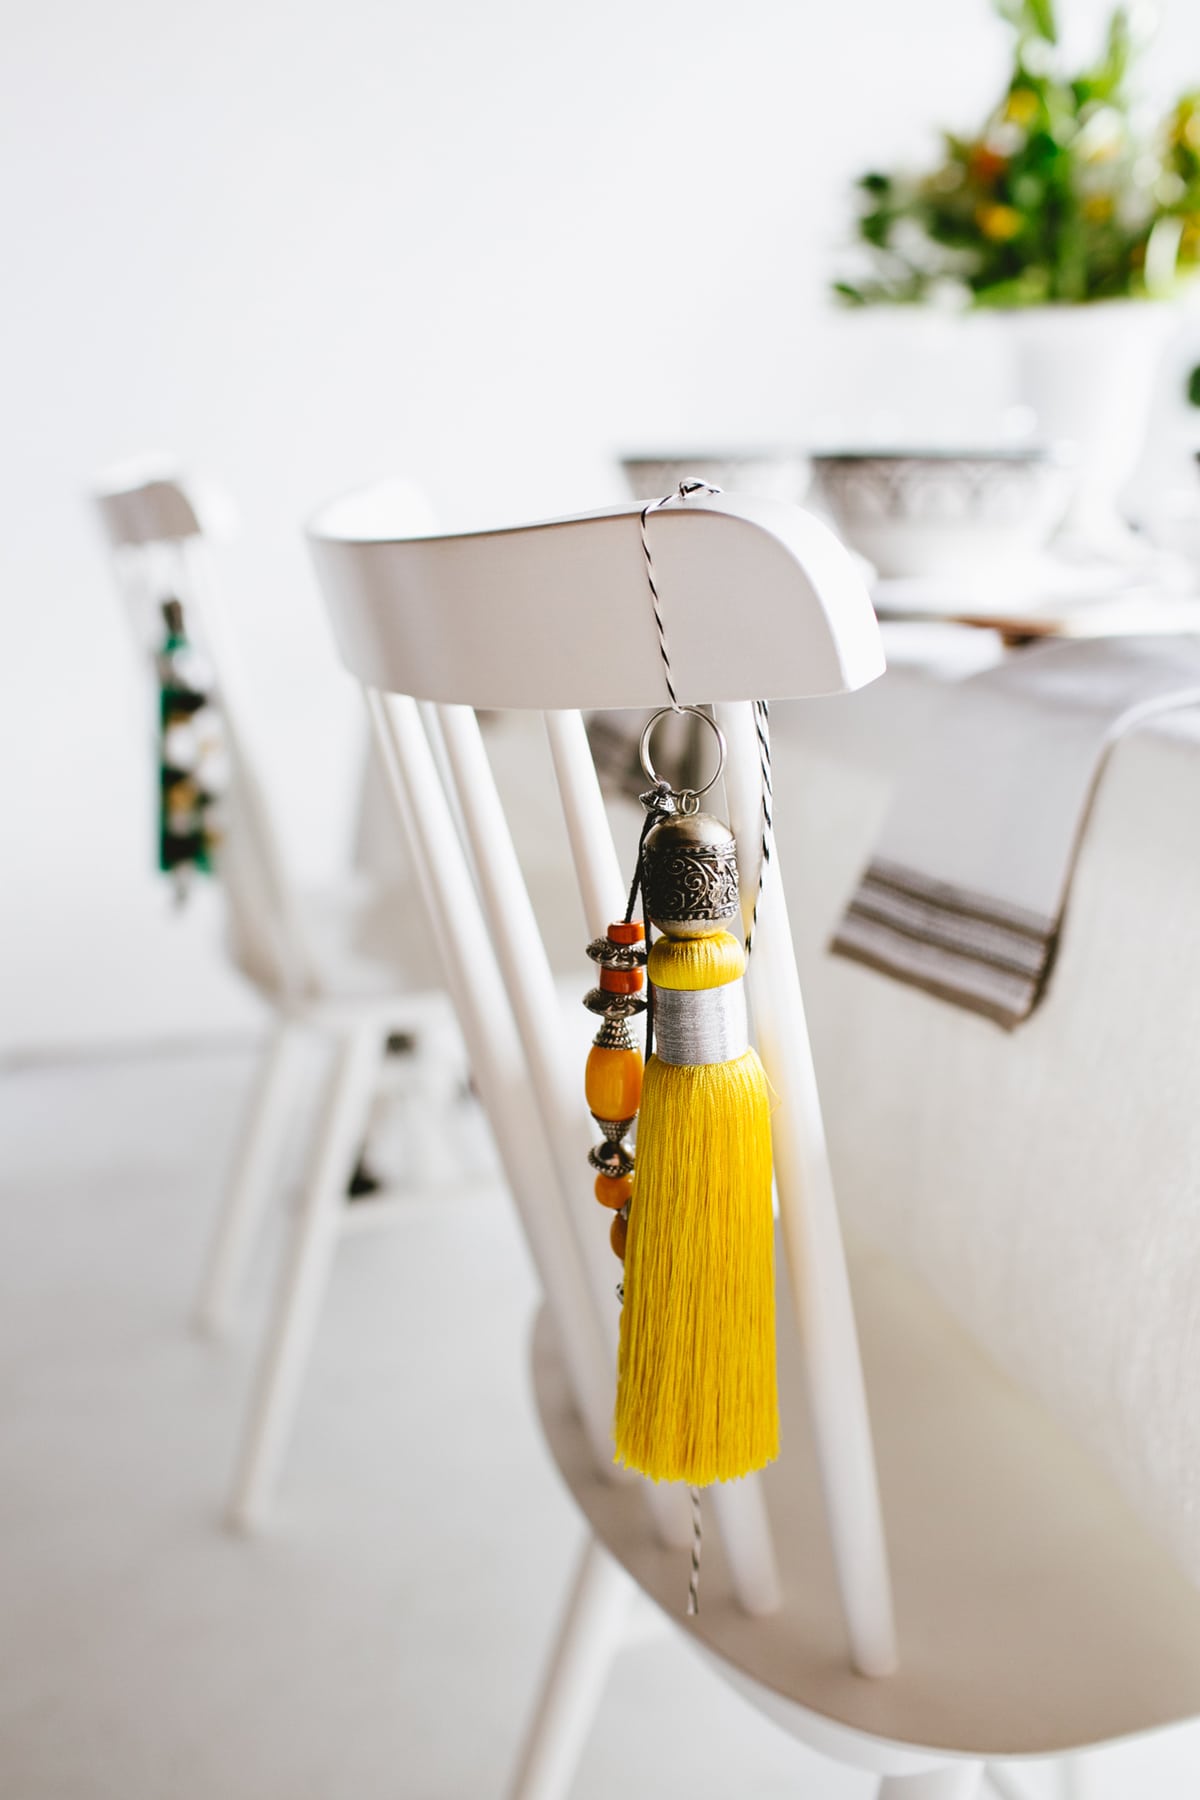 hang moroccan tassels from guest's chairs for a simple gift | moroccan tabletop by coco kelley